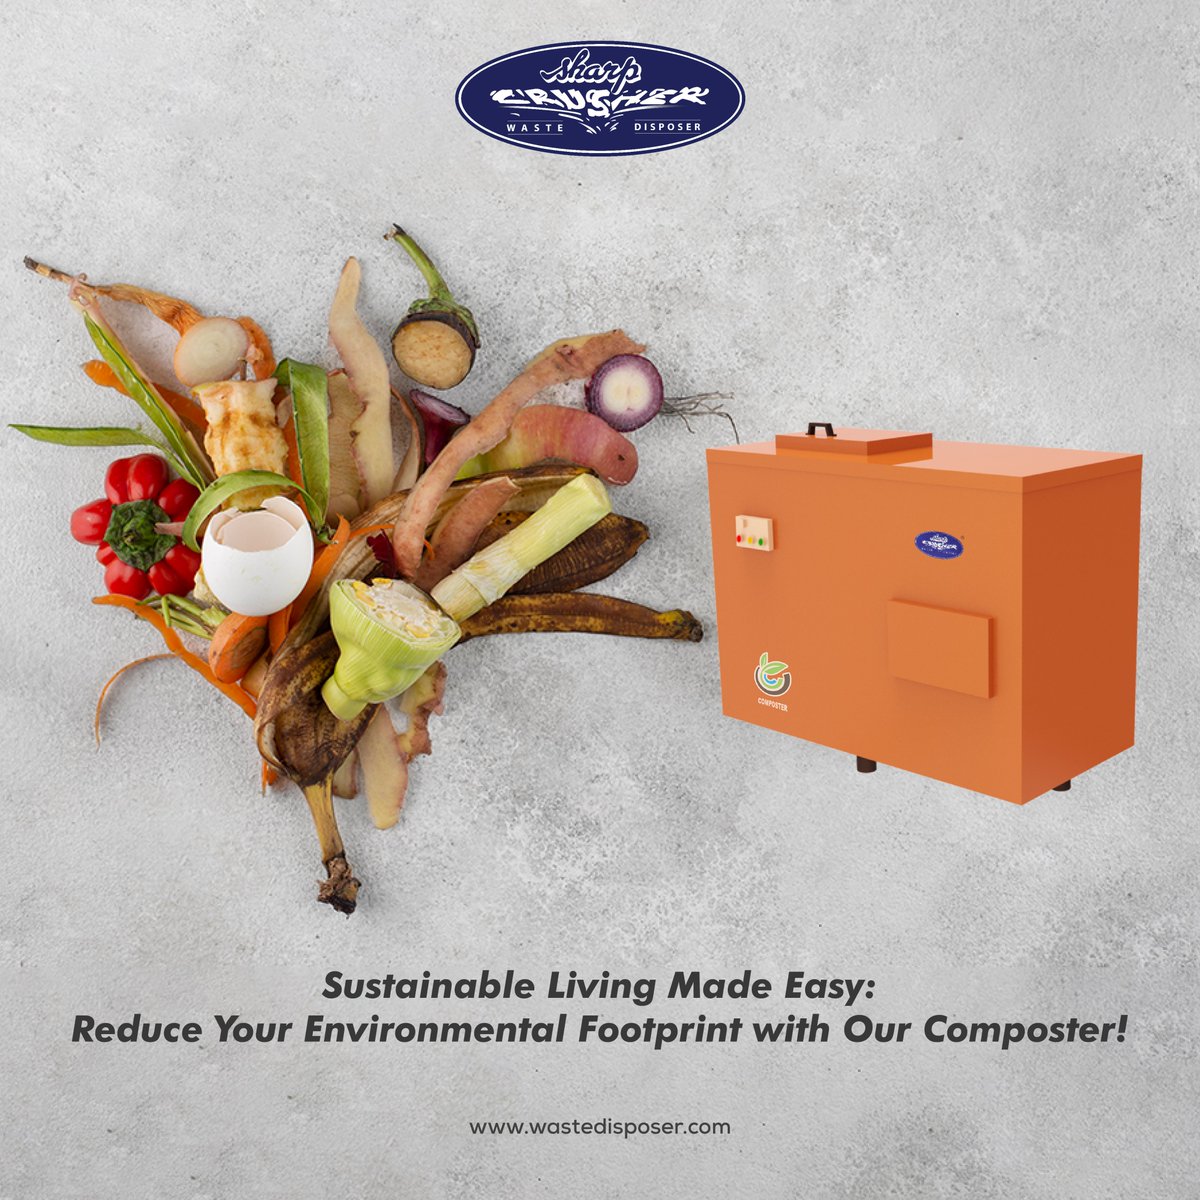 Transform #waste into valuable #Resources with #SharpCrusher's #Composter! 🌿♻️

Turn #kitchen scraps into nutrient-rich #compost for your garden.

Explore more at wastedisposer.com

#WasteDisposer #composting #wastetowealth #composite #OrganicWaste #wastemanagement